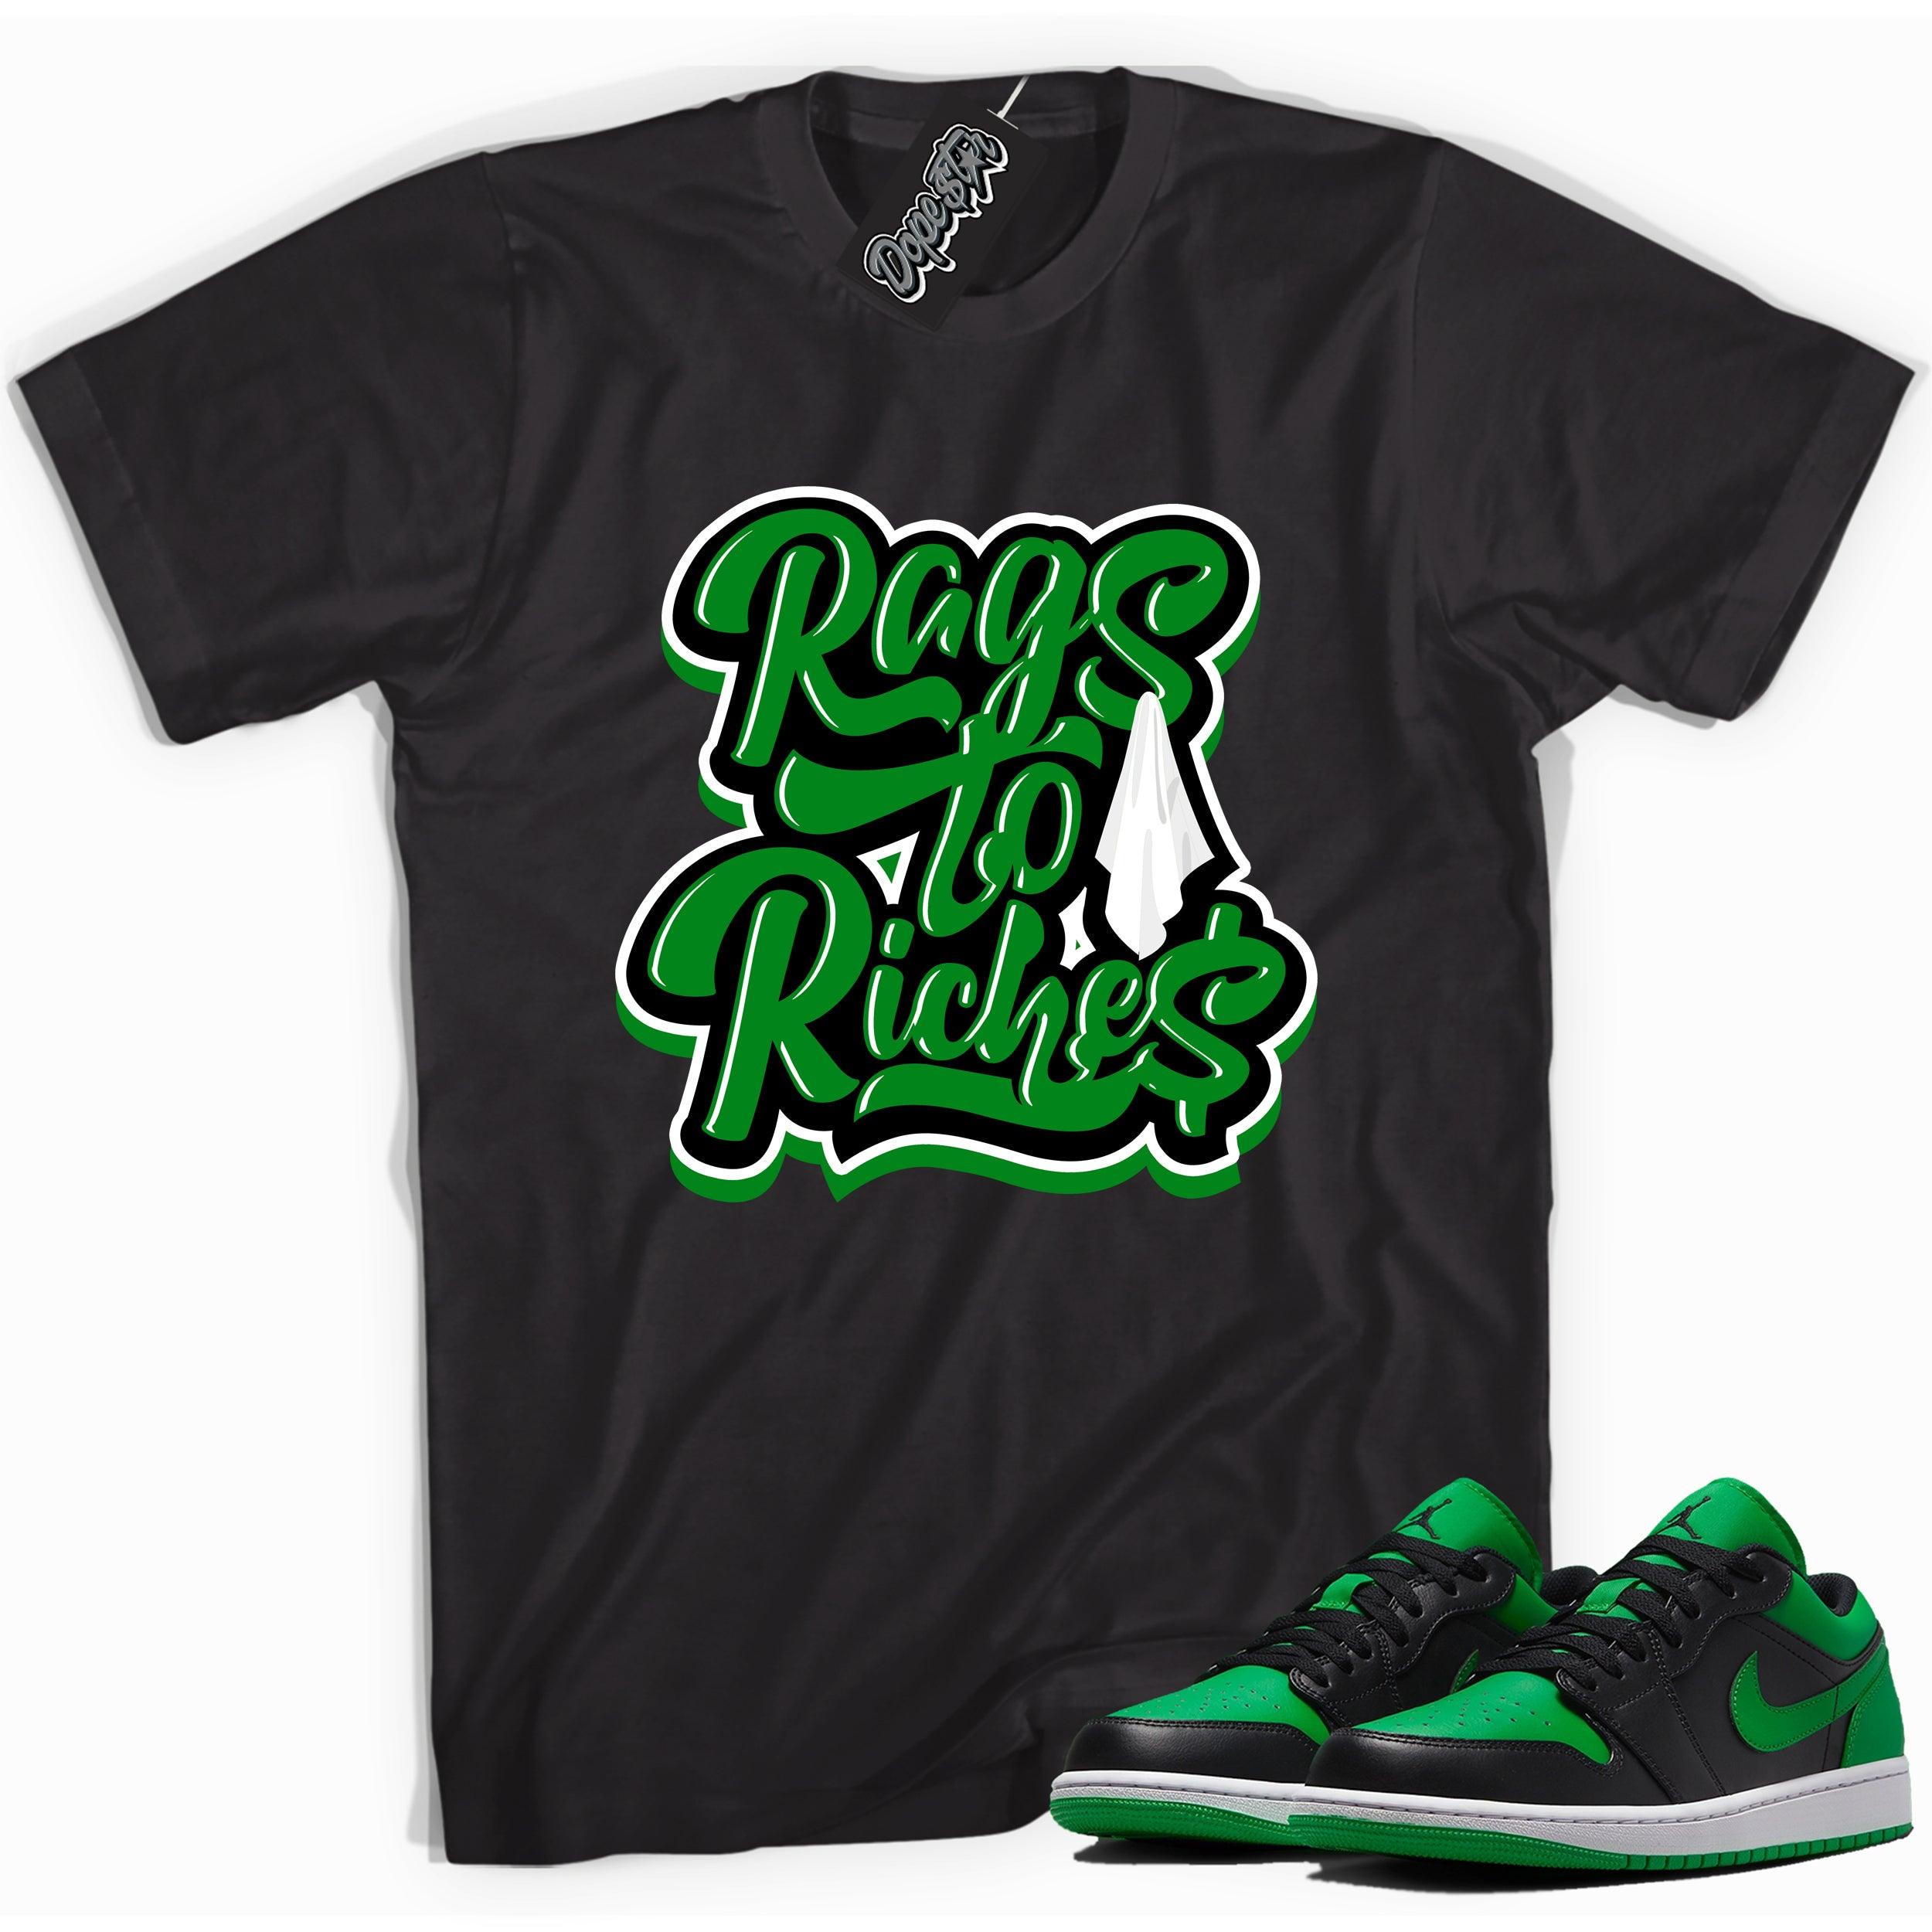 Cool black graphic tee with 'rags to riches' print, that perfectly matches Air Jordan 1 Low Lucky Green sneakers